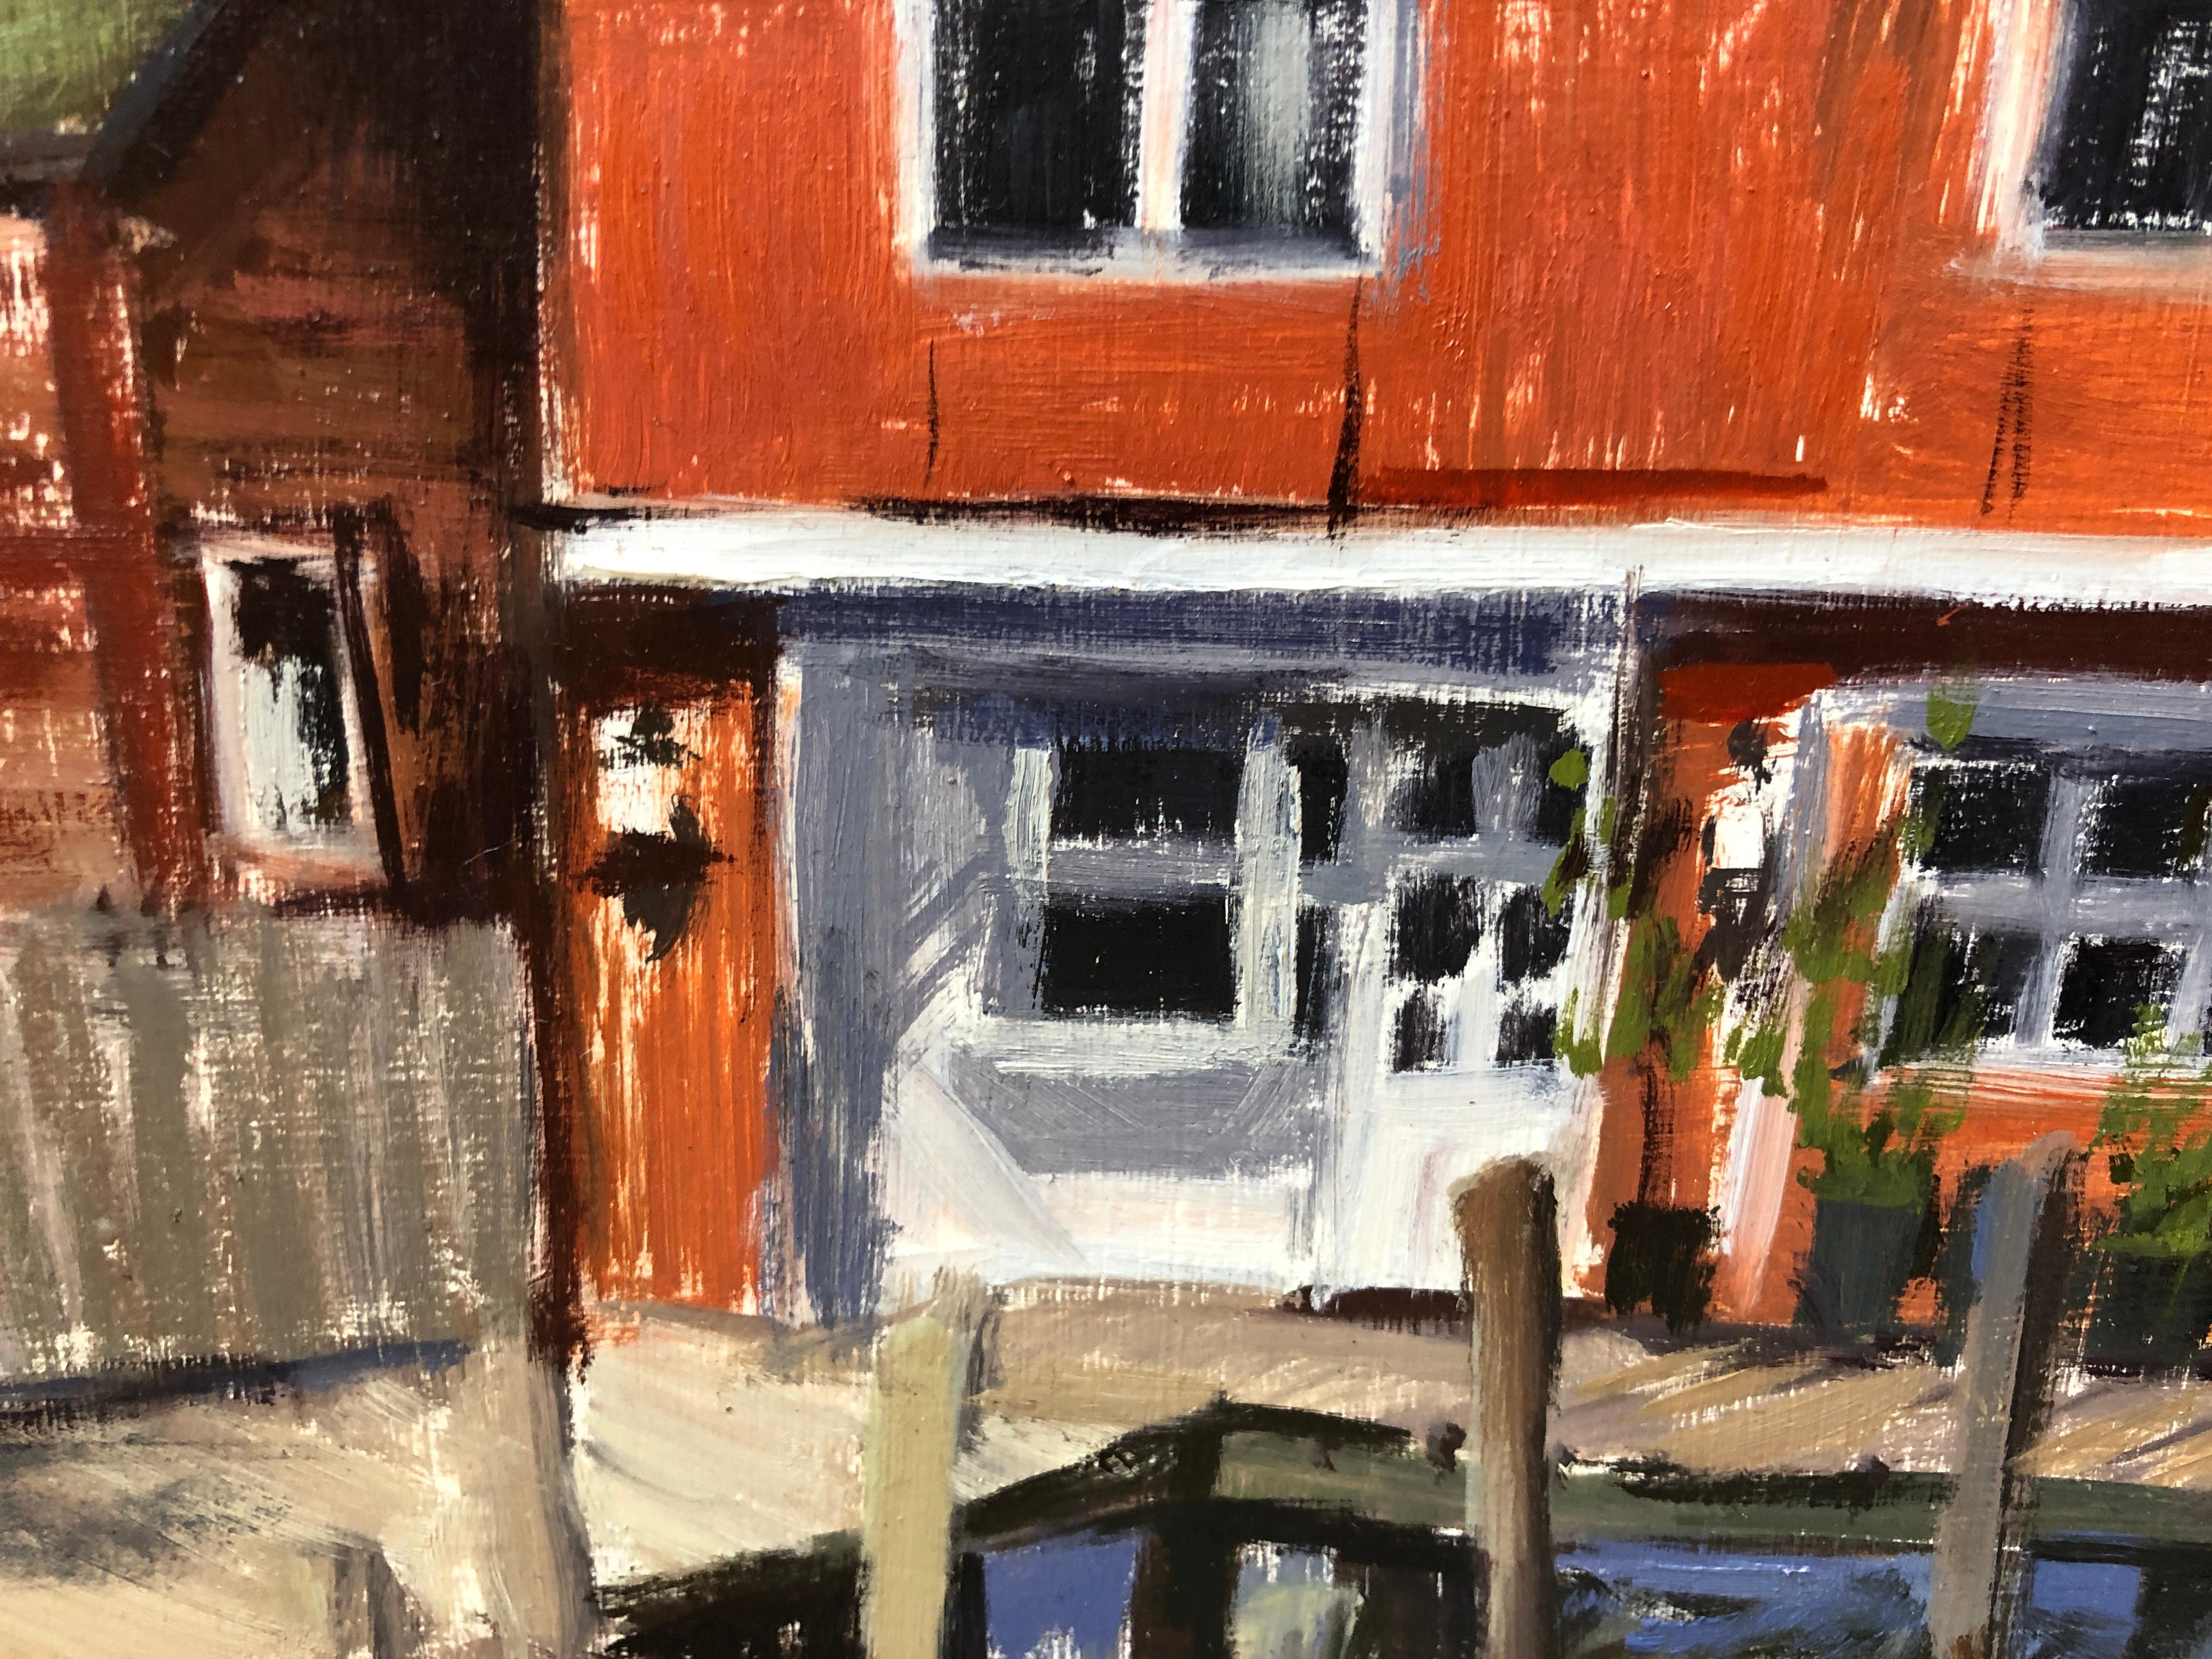 The Old Scrimshaw, Greenport - Post-Impressionist Painting by Megan Euell